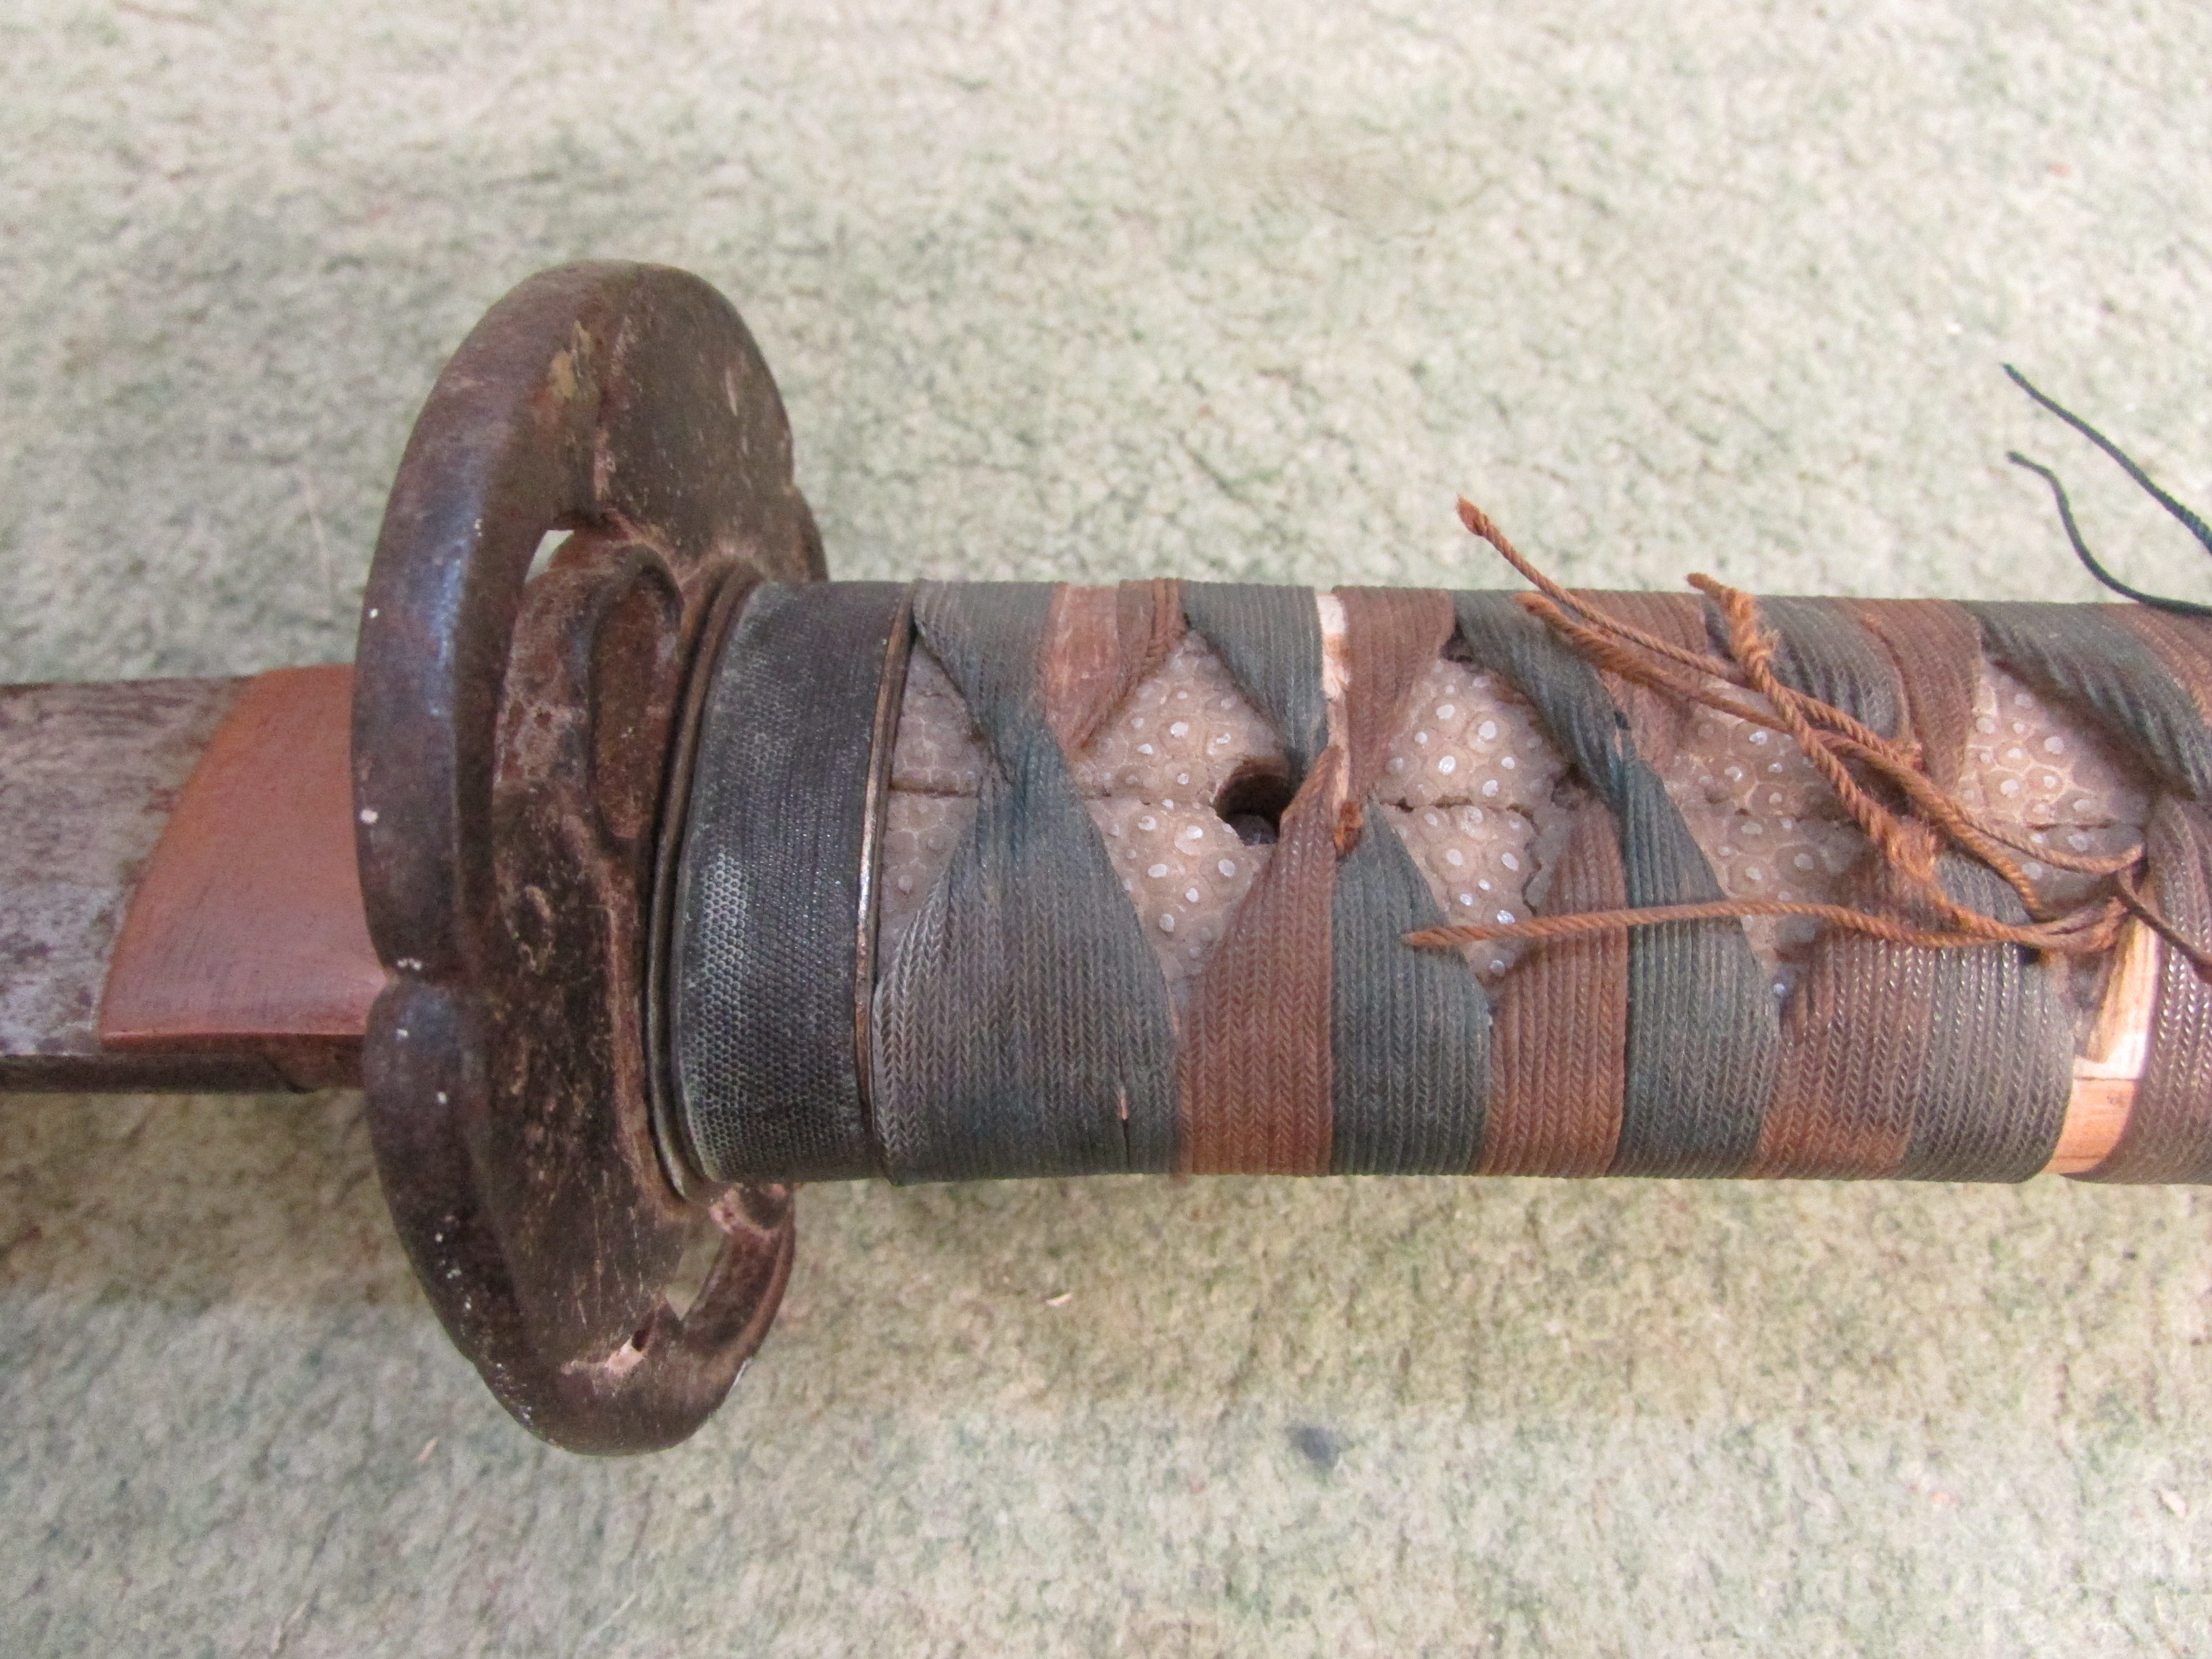 AN ANTIQUE JAPANESE KATANA SWORD WITH SHEATH, SOLD AS FOUND - Image 12 of 35